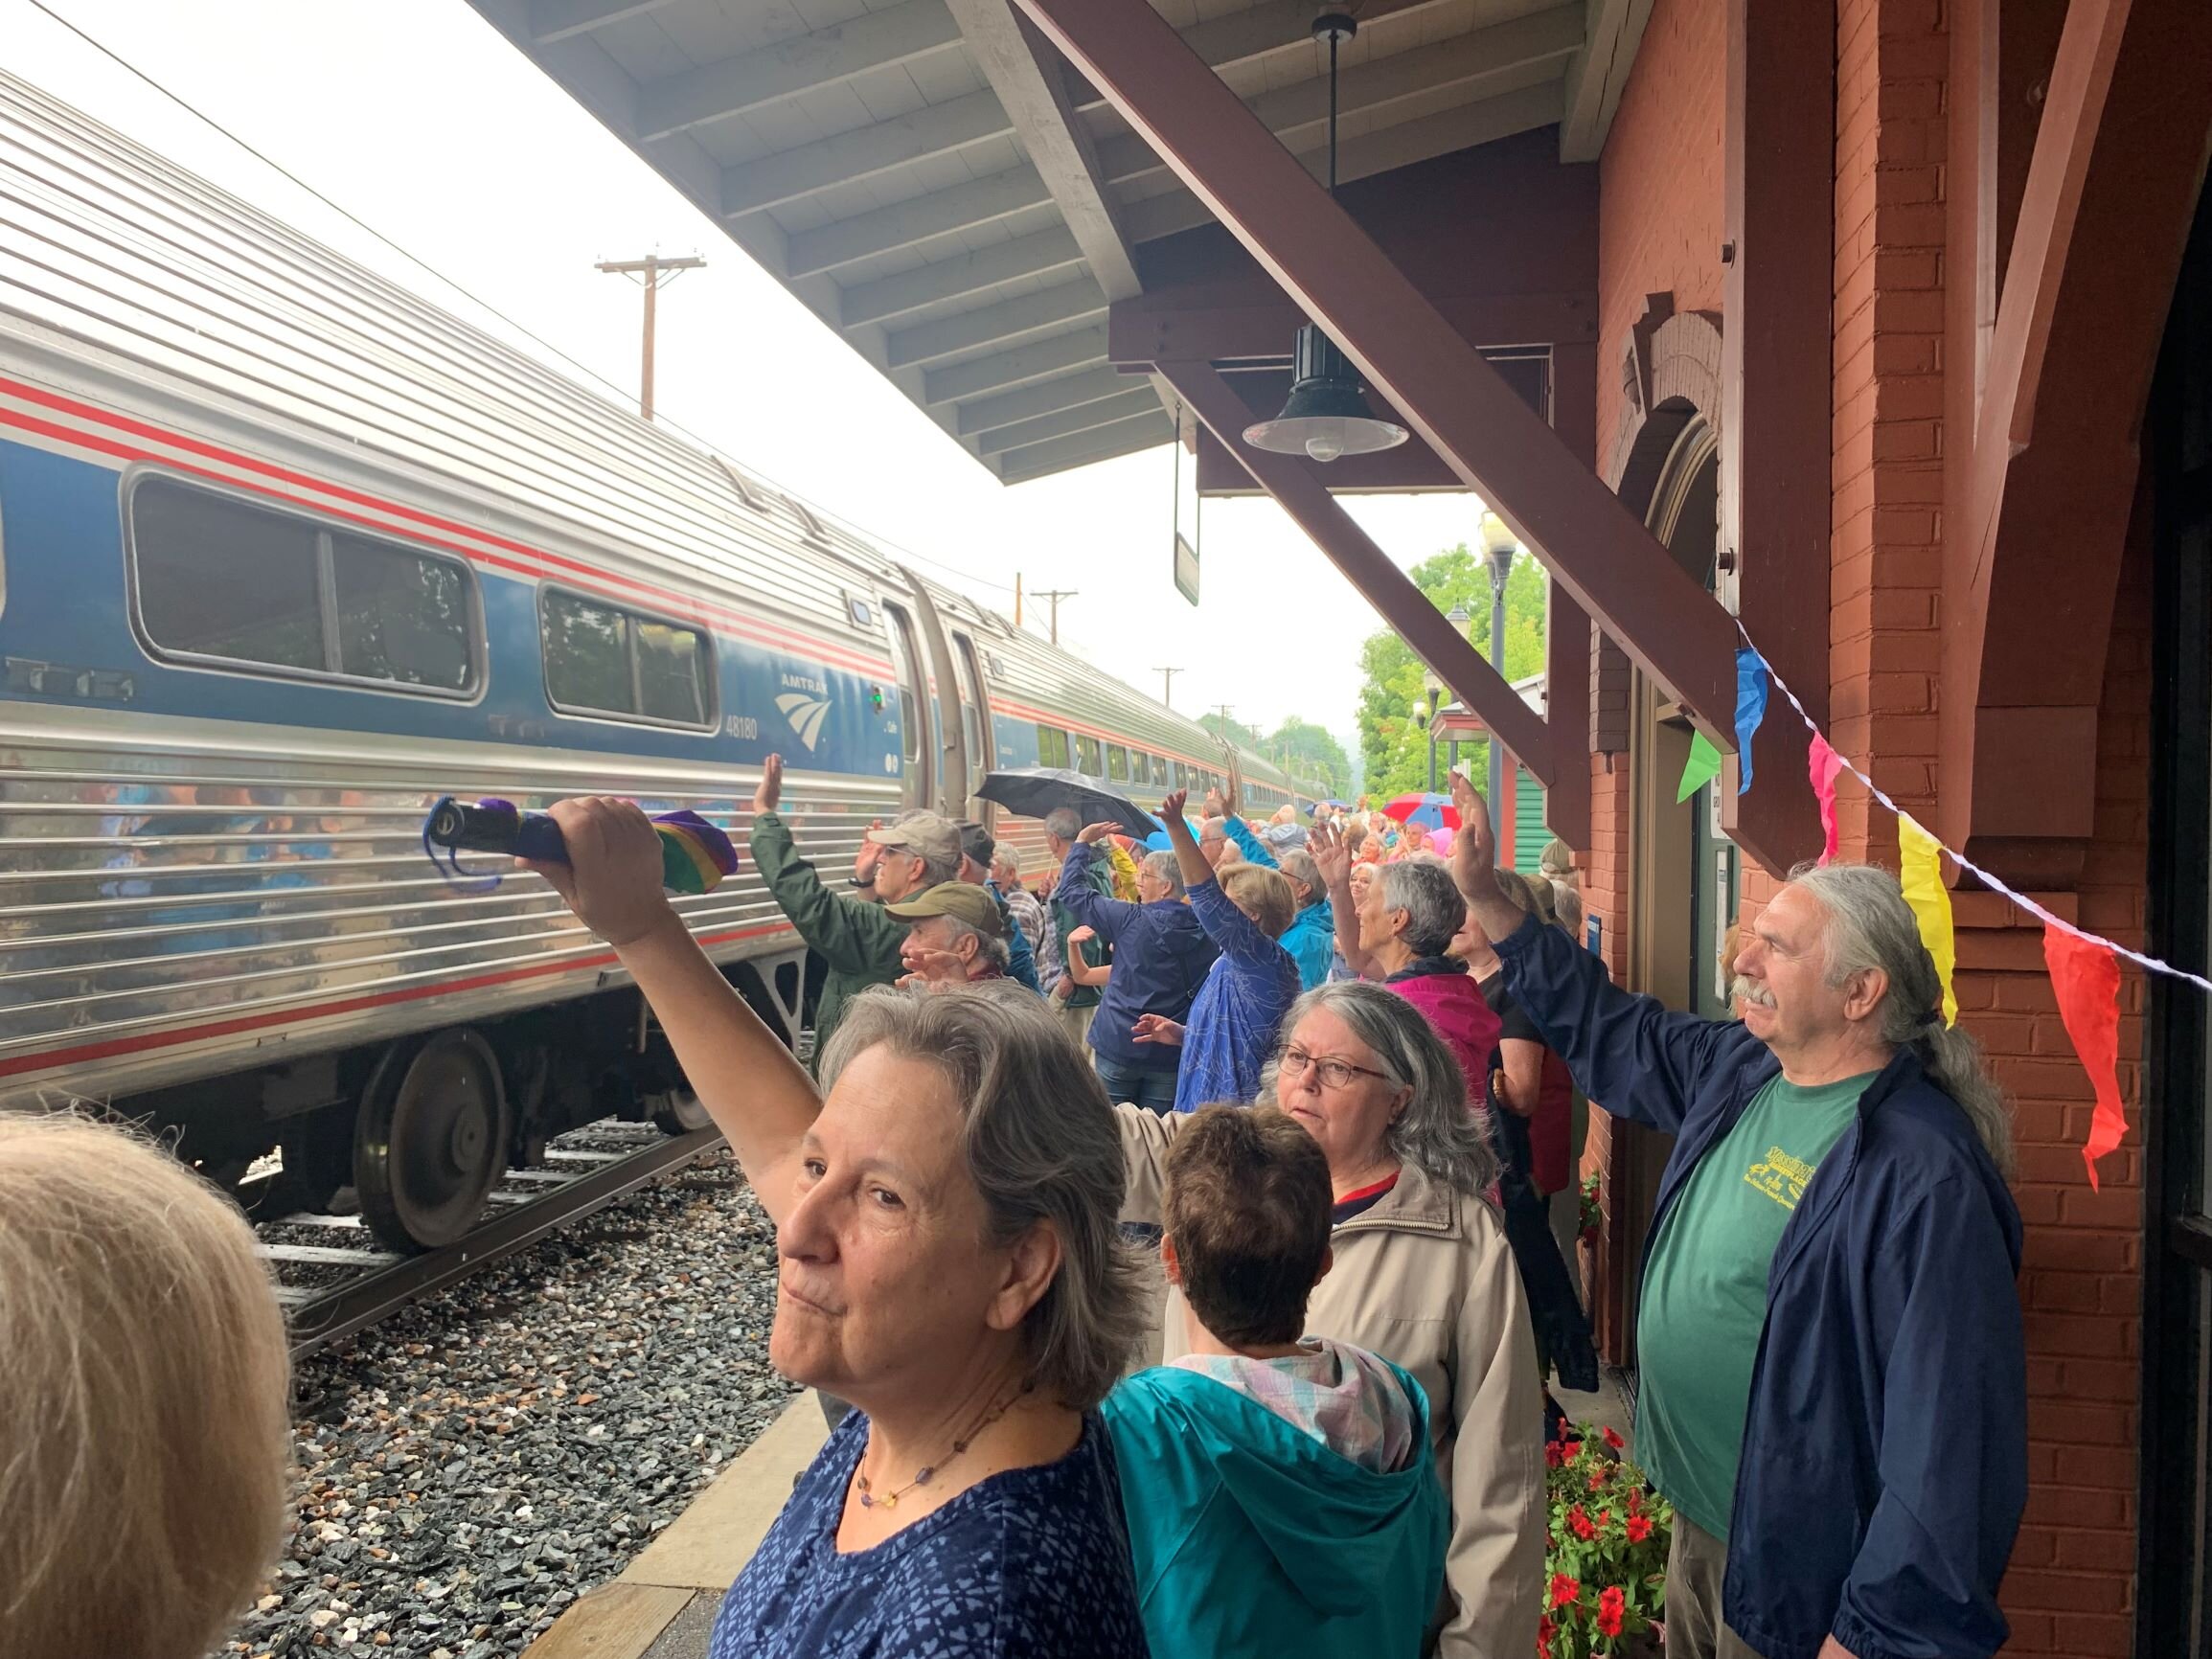   Local residents wave farewell as the train lumbers off to its next stop: Montpelier Junction. Photo by Lisa Scagliotti  